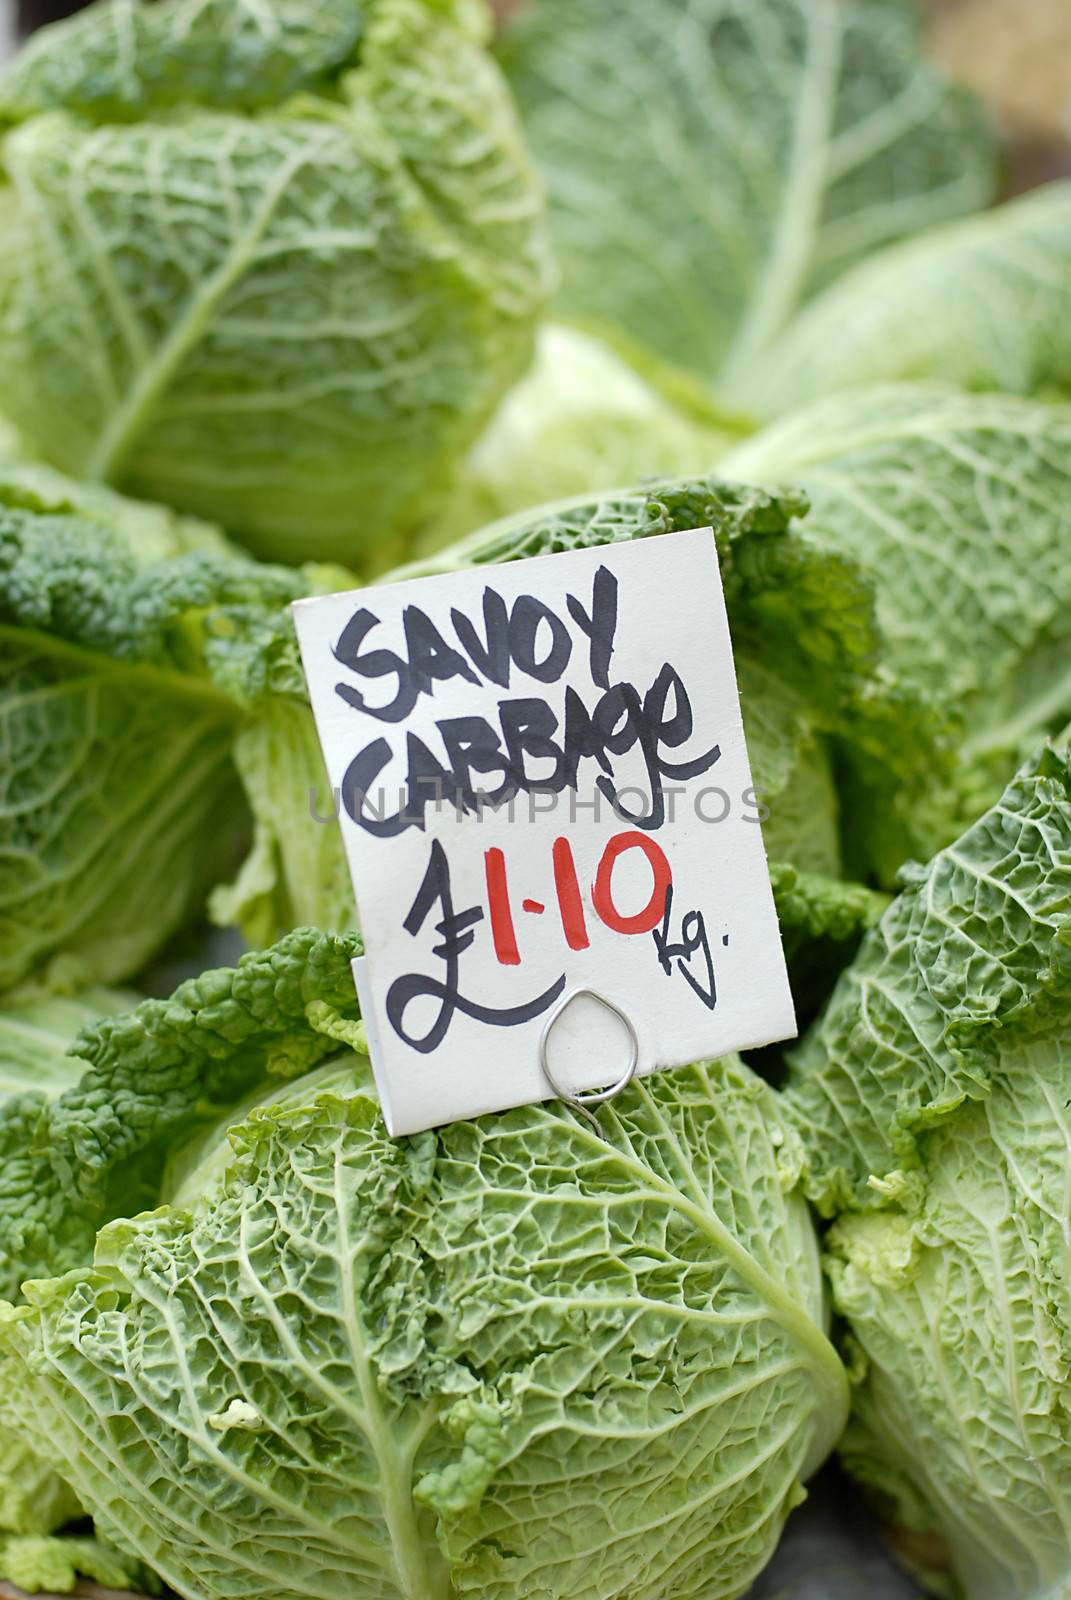 Savoy cabbage vegetable for sale by stockyimages